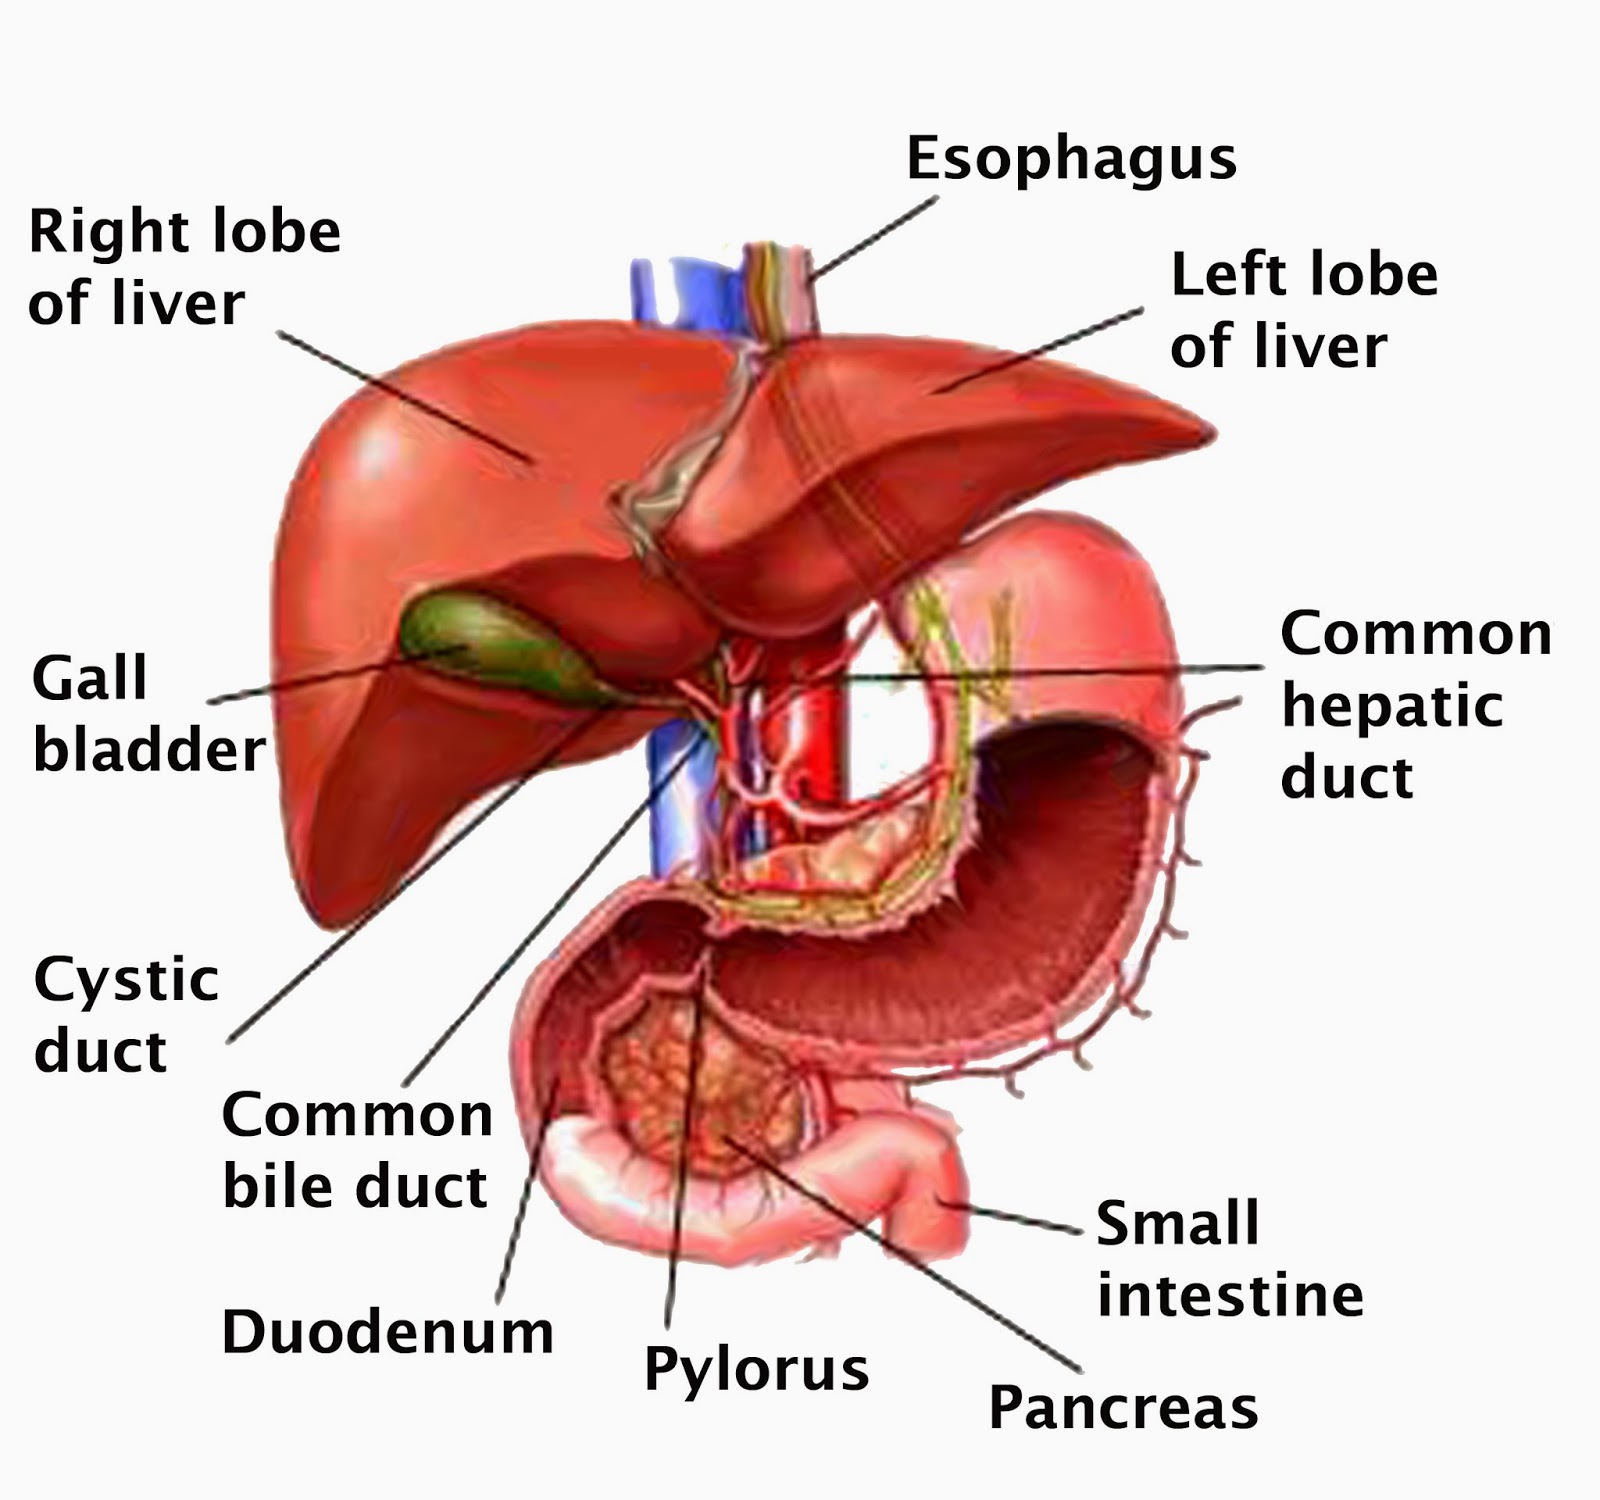   Cirrhosis of the Liver The liver, the largest organ in the body, is essential in keeping the body functioning properly. It removes or neutralizes poisons from the blood, produces immune agents to control infection, and removes germs and bacteria from the blood. It makes proteins that regulate blood clotting and produces bile to help absorb fats and fat-soluble vitamins. You cannot live without a functioning liver. In cirrhosis of the liver, scar tissue replaces normal, healthy tissue, blocking the flow of blood through the organ and preventing it from working as it should. Cirrhosis is the twelfth leading cause of death by disease, killing about 26,000 people each year. Also, the cost of cirrhosis in terms of human suffering, hospital costs, and lost productivity is high.  Causes Cirrhosis has many causes. In the United States, chronic alcoholism and hepatitis C are the most common ones.  Alcoholic liver disease. To many people, cirrhosis of the liver is synonymous with chronic alcoholism, but in fact, alcoholism is only one of the causes. Alcoholic cirrhosis usually develops after more than a decade of heavy drinking. The amount of alcohol that can injure the liver varies greatly from person to person. In women, as few as two to three drinks per day have been linked with cirrhosis and in men, as few as three to four drinks per day. Alcohol seems to injure the liver by blocking the normal metabolism of protein, fats, and carbohydrates.  Chronic hepatitis C. The hepatitis C virus ranks with alcohol as a major cause of chronic liver disease and cirrhosis in the United States. Infection with this virus causes inflammation of and low grade damage to the liver that over several decades can lead to cirrhosis.  Chronic hepatitis B and D. The hepatitis B virus is probably the most common cause of cirrhosis worldwide, but it is less common in the United States and the Western world. Hepatitis B, like hepatitis C, causes liver inflammation and injury that over several decades can lead to cirrhosis. Hepatitis D is another virus that infects the liver, but only in people who already have hepatitis B.  Autoimmune hepatitis. This disease appears to be caused by the immune system attacking the liver and causing inflammation, damage, and eventually scarring and cirrhosis.  Inherited diseases. Alpha-1 antitrypsin deficiency, hemochromatosis, Wilson disease, galactosemia, and glycogen storage diseases are among the inherited diseases that interfere with the way the liver produces, processes, and stores enzymes, proteins, metals, and other substances the body needs to function properly.  Non alcoholic steatohepatitis (NASH). In NASH, fat builds up in the liver and eventually causes scar tissue. This type of hepatitis appears to be associated with diabetes, protein malnutrition, obesity, coronary artery disease, and treatment with corticosteroid medications.  Blocked bile ducts. When the ducts that carry bile out of the liver are blocked, bile backs up and damages liver tissue. In babies, blocked bile ducts are most commonly caused by biliary atresia, a disease in which the bile ducts are absent or injured. In adults, the most common cause is primary biliary cirrhosis, a disease in which the ducts become inflamed, blocked, and scarred. Secondary biliary cirrhosis can happen after gallbladder surgery if the ducts are inadvertently tied off or injured.  Drugs, toxins, and infections. Severe reactions to prescription drugs, prolonged exposure to environmental toxins, the parasitic infection schistosomiasis, and repeated bouts of heart failure with liver congestion can all lead to cirrhosis.  Symptoms Many people with cirrhosis have no symptoms in the early stages of the disease. However, as scar tissue replaces healthy cells, liver function starts to fail and a person may experience the following symptoms: • exhaustion • fatigue • loss of appetite • nausea • weakness • weight loss • abdominal pain  • spider-like blood vessels (spider angiomas) that develop on the skin As the disease progresses, complications may develop. In some people, these may be the first signs of the disease.  Complications of Cirrhosis Loss of liver function affects the body in many ways. Following are the common problems, or complications, caused by cirrhosis.  Oedema and ascites. When the liver loses its ability to make the protein albumin, water accumulates in the legs (oedema) and abdomen (ascites).  Bruising and bleeding. When the liver slows or stops production of the proteins needed for blood clotting, a person will bruise or bleed easily. The palms of the hands may be reddish and blotchy with palmar erythema.  Jaundice. Jaundice is a yellowing of the skin and eyes that occurs when the diseased liver does not absorb enough bilirubin.  Itching. Bile products deposited in the skin may cause intense itching.  Gallstones. If cirrhosis prevents bile from reaching the gallbladder, gallstones may develop.  Toxins in the blood or brain. A damaged liver cannot remove toxins from the blood, causing them to accumulate in the blood and eventually the brain. There, toxins can dull mental functioning and cause personality changes, coma, and even death. Signs of the build-up of toxins in the brain include neglect of personal appearance, unresponsiveness, forgetfulness, trouble concentrating, or changes in sleep habits.  Sensitivity to medication. Cirrhosis slows the liver's ability to filter medications from the blood. Because the liver does not remove drugs from the blood at the usual rate, they act longer than expected and build up in the body. This causes a person to be more sensitive to medications and their side effects.  Portal hypertension. Normally, blood from the intestines and spleen is carried to the liver through the portal vein. But cirrhosis slows the normal flow of blood through the portal vein, which increases the pressure inside it. This condition is called portal hypertension.  Varices. When blood flow through the portal vein slows, blood from the intestines and spleen backs up into blood vessels in the stomach and oesophagus. These blood vessels may become enlarged because they are not meant to carry this much blood. The enlarged blood vessels, called varices, have thin walls and carry high pressure, and thus are more likely to burst. If they do burst, the result is a serious bleeding problem in the upper stomach or oesophagus that requires immediate medical attention.  Insulin resistance and type 2 diabetes. Cirrhosis causes resistance to insulin. This hormone, produced by the pancreas, enables blood glucose to be used as energy by the cells of the body. If you have insulin resistance, your muscle, fat, and liver cells do not use insulin properly. The pancreas tries to keep up with the demand for insulin by producing more. Eventually, the pancreas cannot keep up with the body's need for insulin, and type 2 diabetes develops as excess glucose builds up in the bloodstream.  Liver cancer. Hepato cellular carcinoma, a type of liver cancer commonly caused by cirrhosis, starts in the liver tissue itself. It has a high mortality rate.  Problems in other organs. Cirrhosis can cause immune system dysfunction, leading to infection. Fluid in the abdomen (ascites) may become infected with bacteria normally present in the intestines. Cirrhosis can also lead to impotence, kidney dysfunction and failure, and osteoporosis.  Diagnosis The doctor may diagnose cirrhosis on the basis of symptoms, laboratory tests, the medical history, and a physical examination. For example, during a physical examination, the doctor may notice that the liver feels harder or larger than usual and order blood tests that can show whether liver disease is present. If looking at the liver is necessary to check for signs of disease, the doctor might order a computerized axial tomography (CAT) scan, ultrasound, magnetic resonance imaging (MRI), or a scan of the liver using a radioisotope (a harmless radioactive substance that highlights the liver). Or the doctor might look at the liver using a laparoscope, an instrument that is inserted through the abdomen and relays pictures back to a computer screen. A liver biopsy will confirm the diagnosis. For a biopsy, the doctor uses a needle to take a tiny sample of liver tissue, then examines it under the microscope for scarring or other signs of disease.  Treatment Liver damage from cirrhosis cannot be reversed, but treatment can stop or delay further progression and reduce complications. Treatment depends on the cause of cirrhosis and any complications a person is experiencing. For example, cirrhosis caused by alcohol abuse is treated by abstaining from alcohol. Treatment for hepatitis-related cirrhosis involves medications used to treat the different types of hepatitis, In all cases, regardless of the cause, following a healthy diet and avoiding alcohol are essential because the body needs all the nutrients it can get, and alcohol will only lead to more liver damage. Light physical activity can help stop or delay cirrhosis as well. Treatment will also include remedies for complications. For example, for ascites and oedema, the doctor may recommend a low-sodium diet or the use of diuretics, which are drugs that remove fluid from the body. Protein causes toxins to form in the digestive tract, so eating less protein will help decrease the build-up of toxins in the blood and brain. The doctor may also prescribe laxatives to help absorb the toxins and remove them from the intestines. For portal hypertension, the doctor may prescribe a blood pressure medication.  When complications cannot be controlled or when the liver becomes so damaged from scarring that it completely stops functioning, a liver transplant is necessary. In liver transplantation surgery, a diseased liver is removed and replaced with a healthy one from an organ donor. About 80 to 90 percent of patients survive liver transplantation. Survival rates have improved over the past several years because of drugs.   Homeopathy medicines Treatment for Liver Problems  Symptomatic Homeopathy works well for Liver Problems, So its good to consult a experienced Homeopathy physician without any hesitation.    Whom to contact for Liver Problems Treatment  Dr.Senthil Kumar Treats many cases of Liver Problems, In his medical professional experience with successful results. Many patients get relief after taking treatment from Dr.Senthil Kumar.  Dr.Senthil Kumar visits Chennai at Vivekanantha Homeopathy Clinic, Velachery, Chennai 42. To get appointment please call 9786901830, +91 94430 54168 or mail to consult.ur.dr@gmail.com,    For more details & Consultation Feel free to contact us. Vivekanantha Clinic Consultation Champers at Chennai:- 9786901830  Panruti:- 9443054168  Pondicherry:- 9865212055 (Camp) Mail : consult.ur.dr@gmail.com, homoeokumar@gmail.com   For appointment please Call us or Mail Us  For appointment: SMS your Name -Age – Mobile Number - Problem in Single word - date and day - Place of appointment (Eg: Rajini – 30 - 99xxxxxxx0 – Hepatitis, Jaundice, HbsAg Positive,  – 21st Oct, Sunday - Chennai ), You will receive Appointment details through SMS